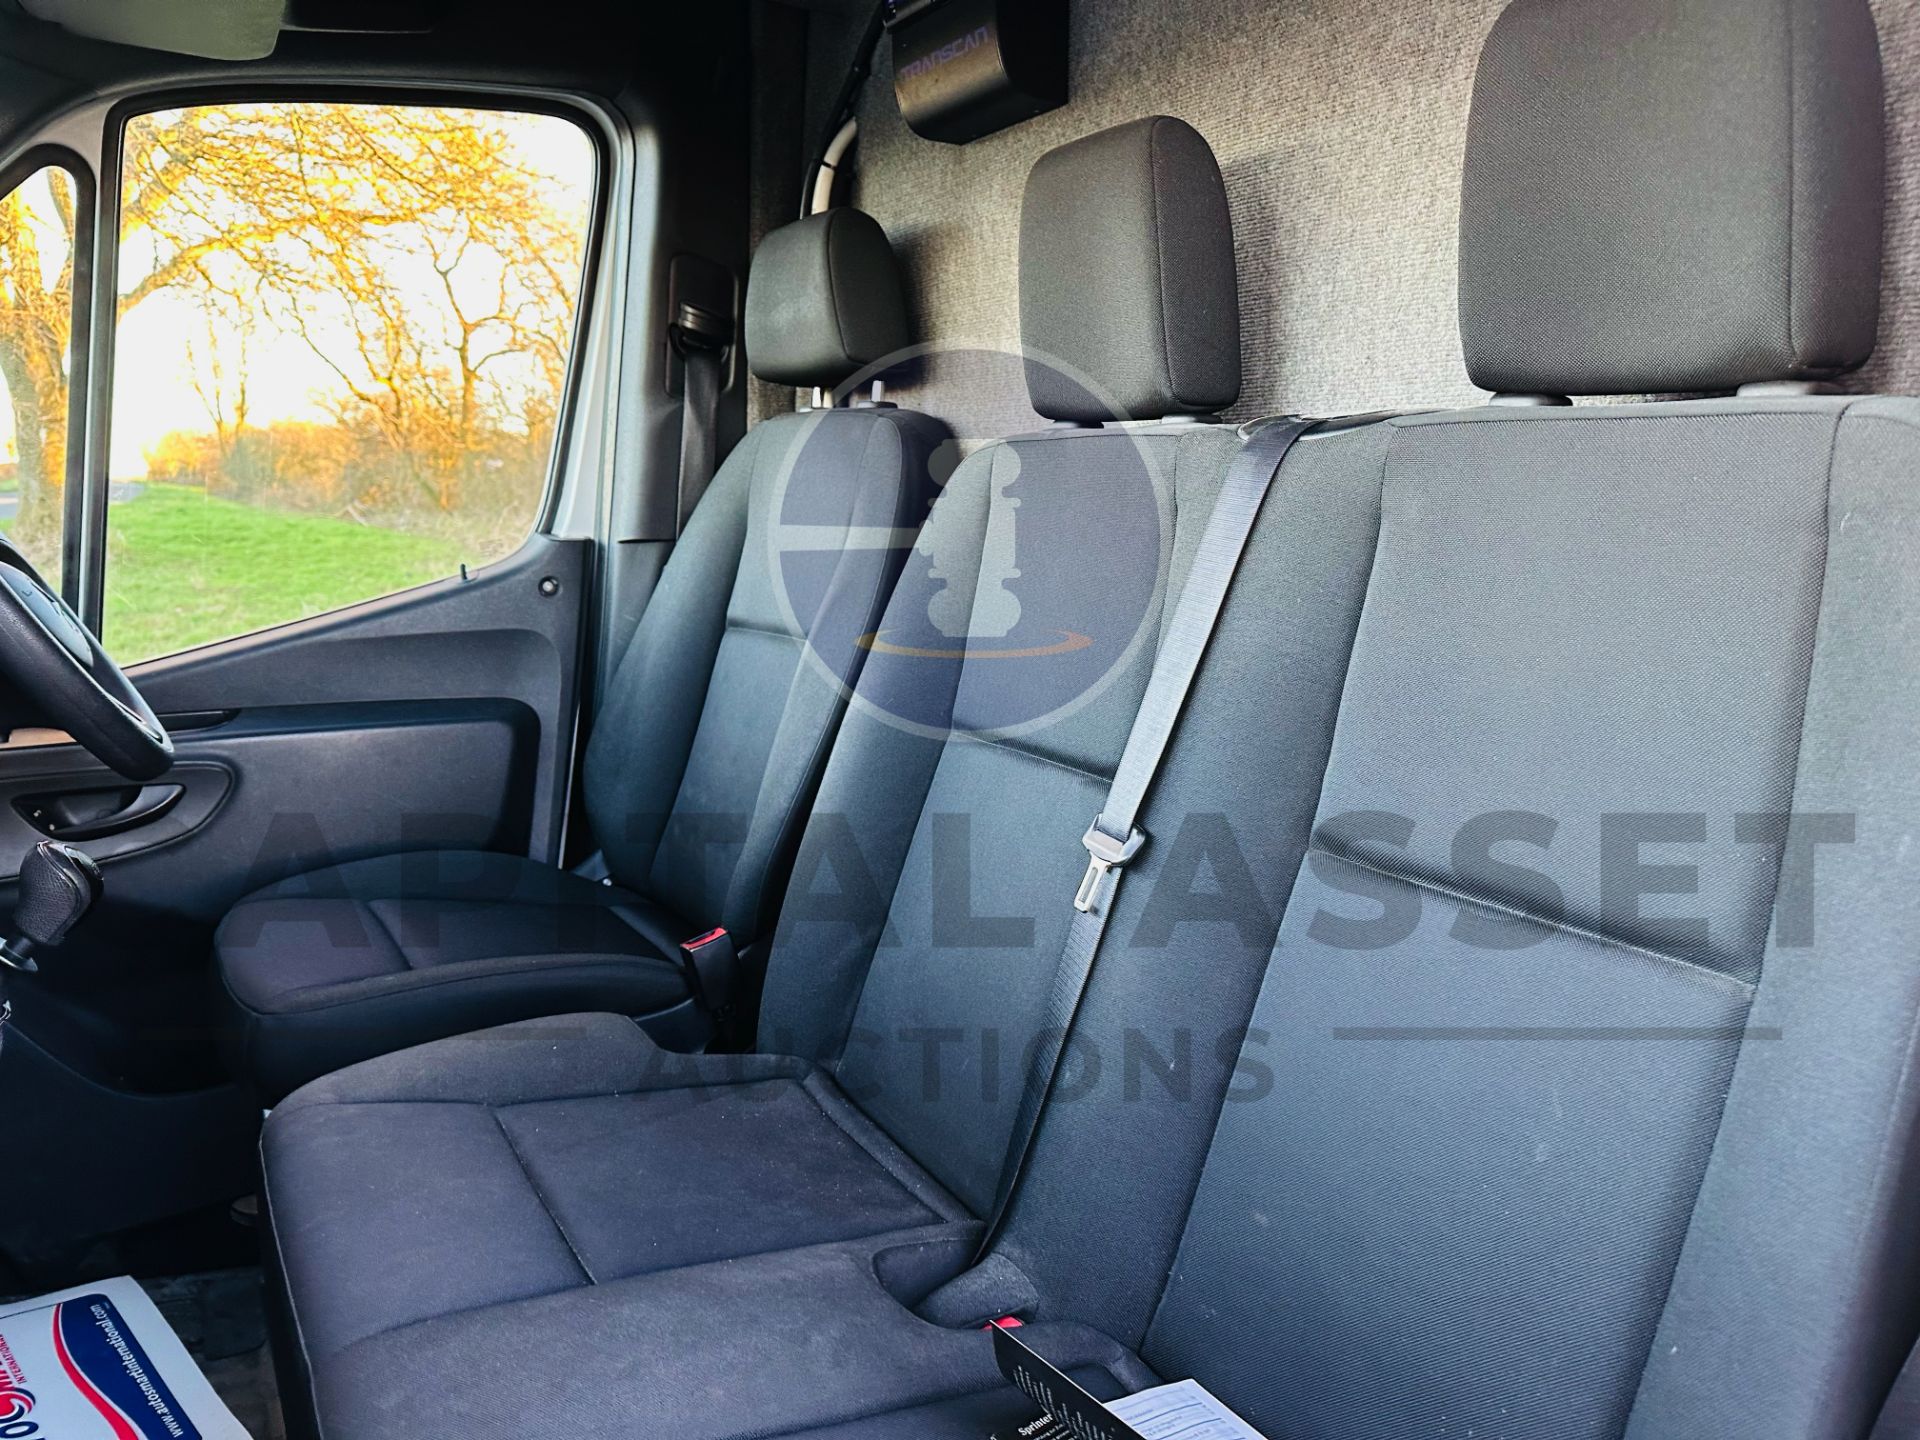 MERCEDES-BENZ SPRINTER 314 CDI *MWB - REFRIGERATED VAN* (2019 - FACELIFT MODEL) *OVERNIGHT STANDBY* - Image 17 of 32